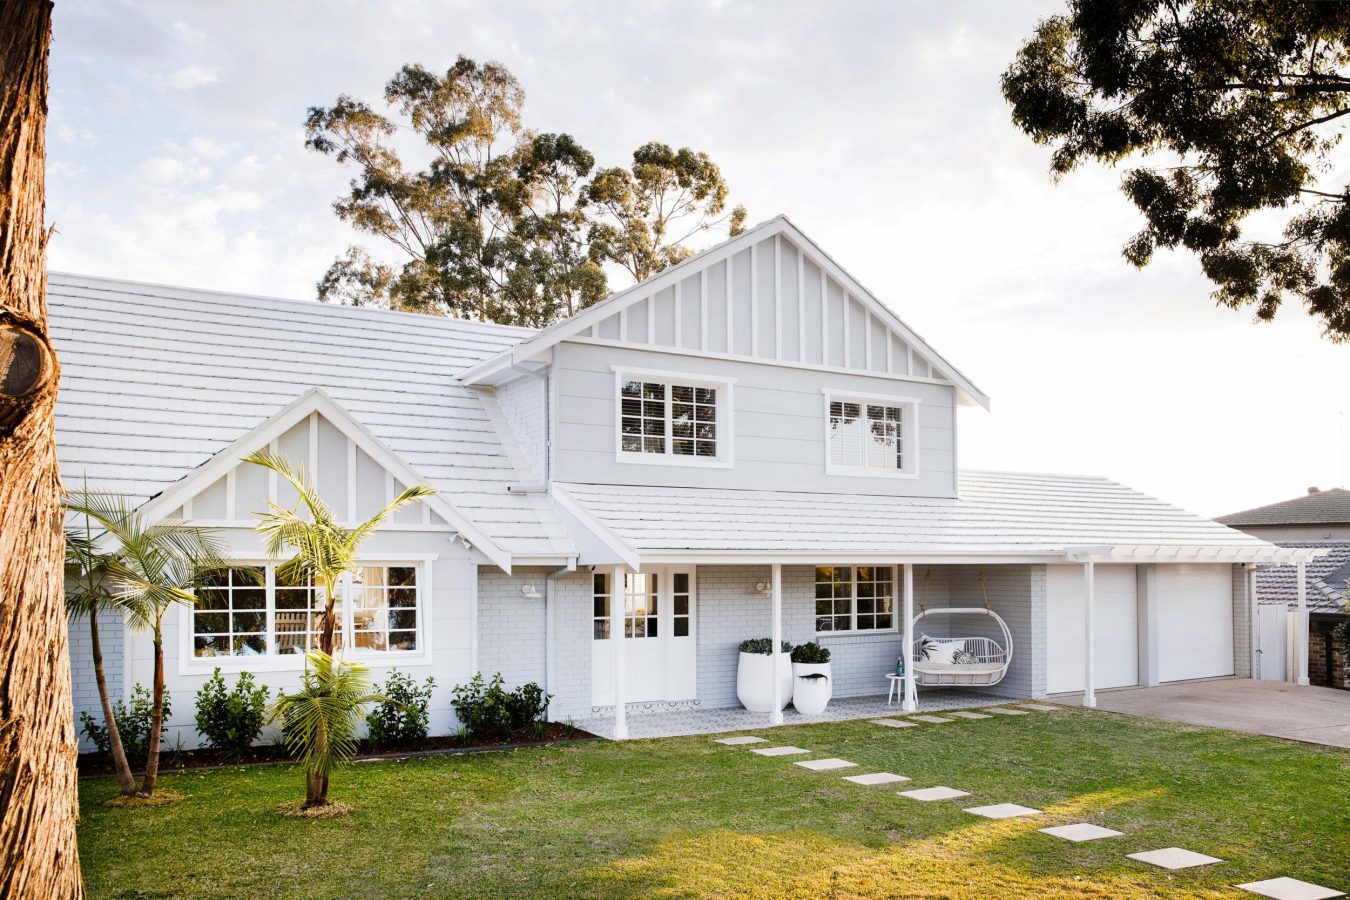 Getting the Hamptons Look in an Aussie Home